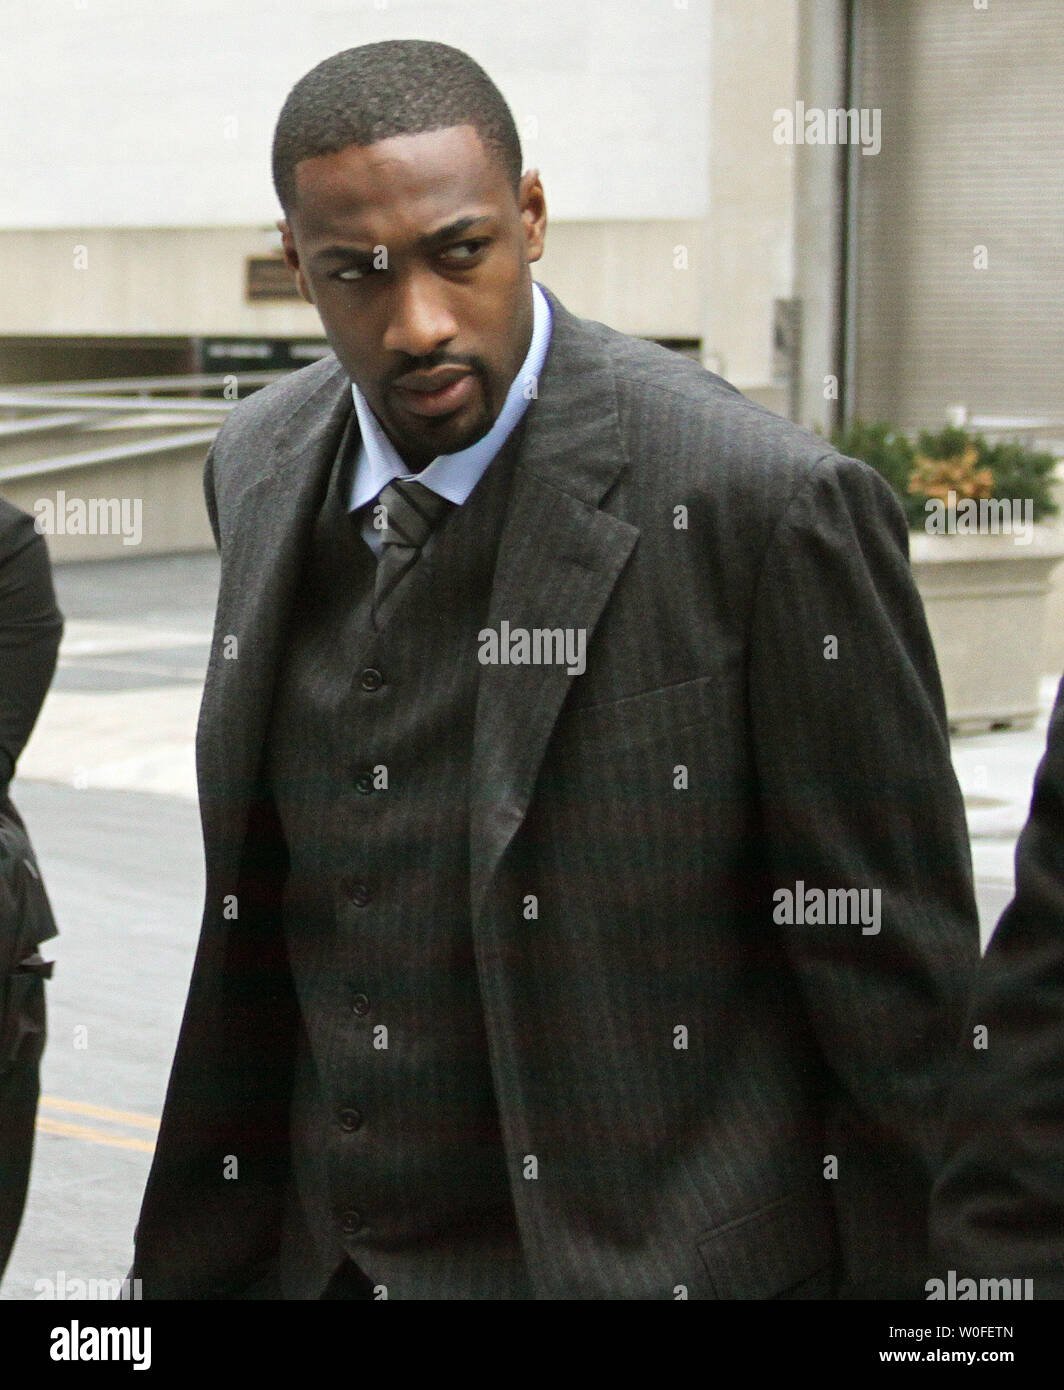 Washington Wizards guard Gilbert Arenas arrives at the District of Columbia courthouse to answer the felony count of carrying a handgun without a license in Washington on January 14, 2010.   UPI/Scott Eaton Stock Photo